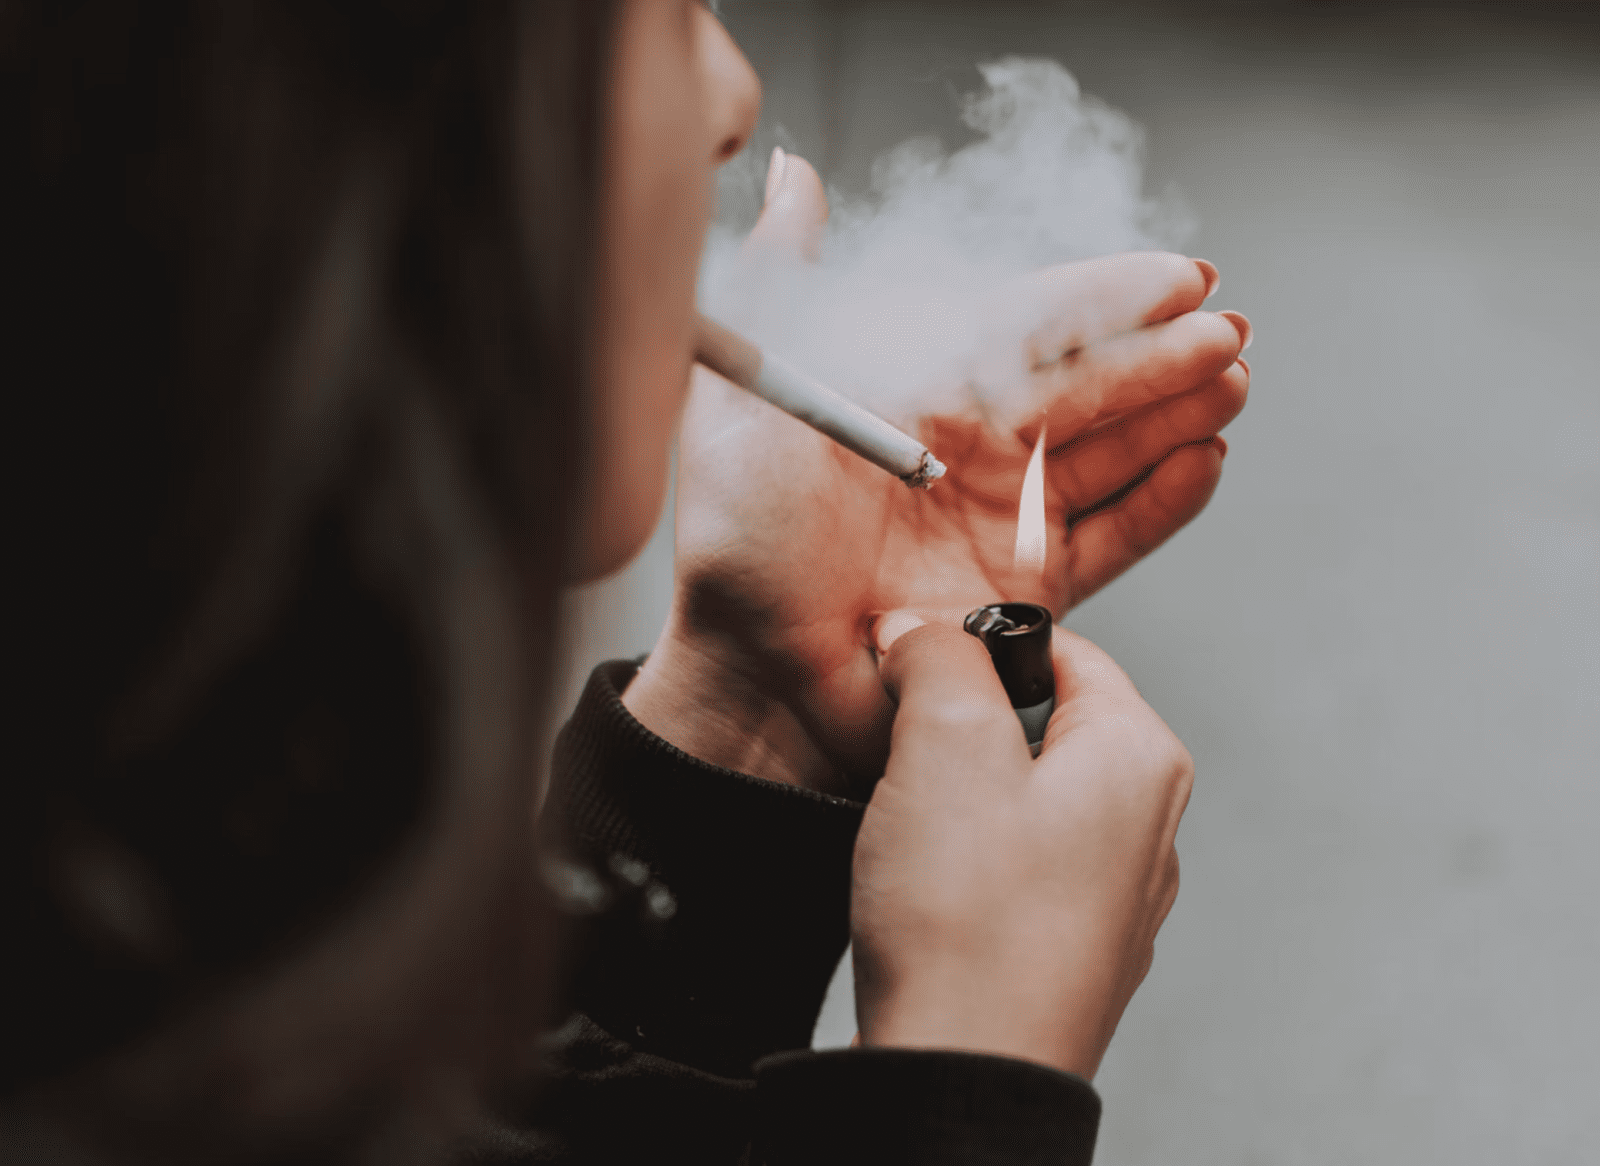 Under-25s could be banned from buying cigarettes in England under government plans, The Manc